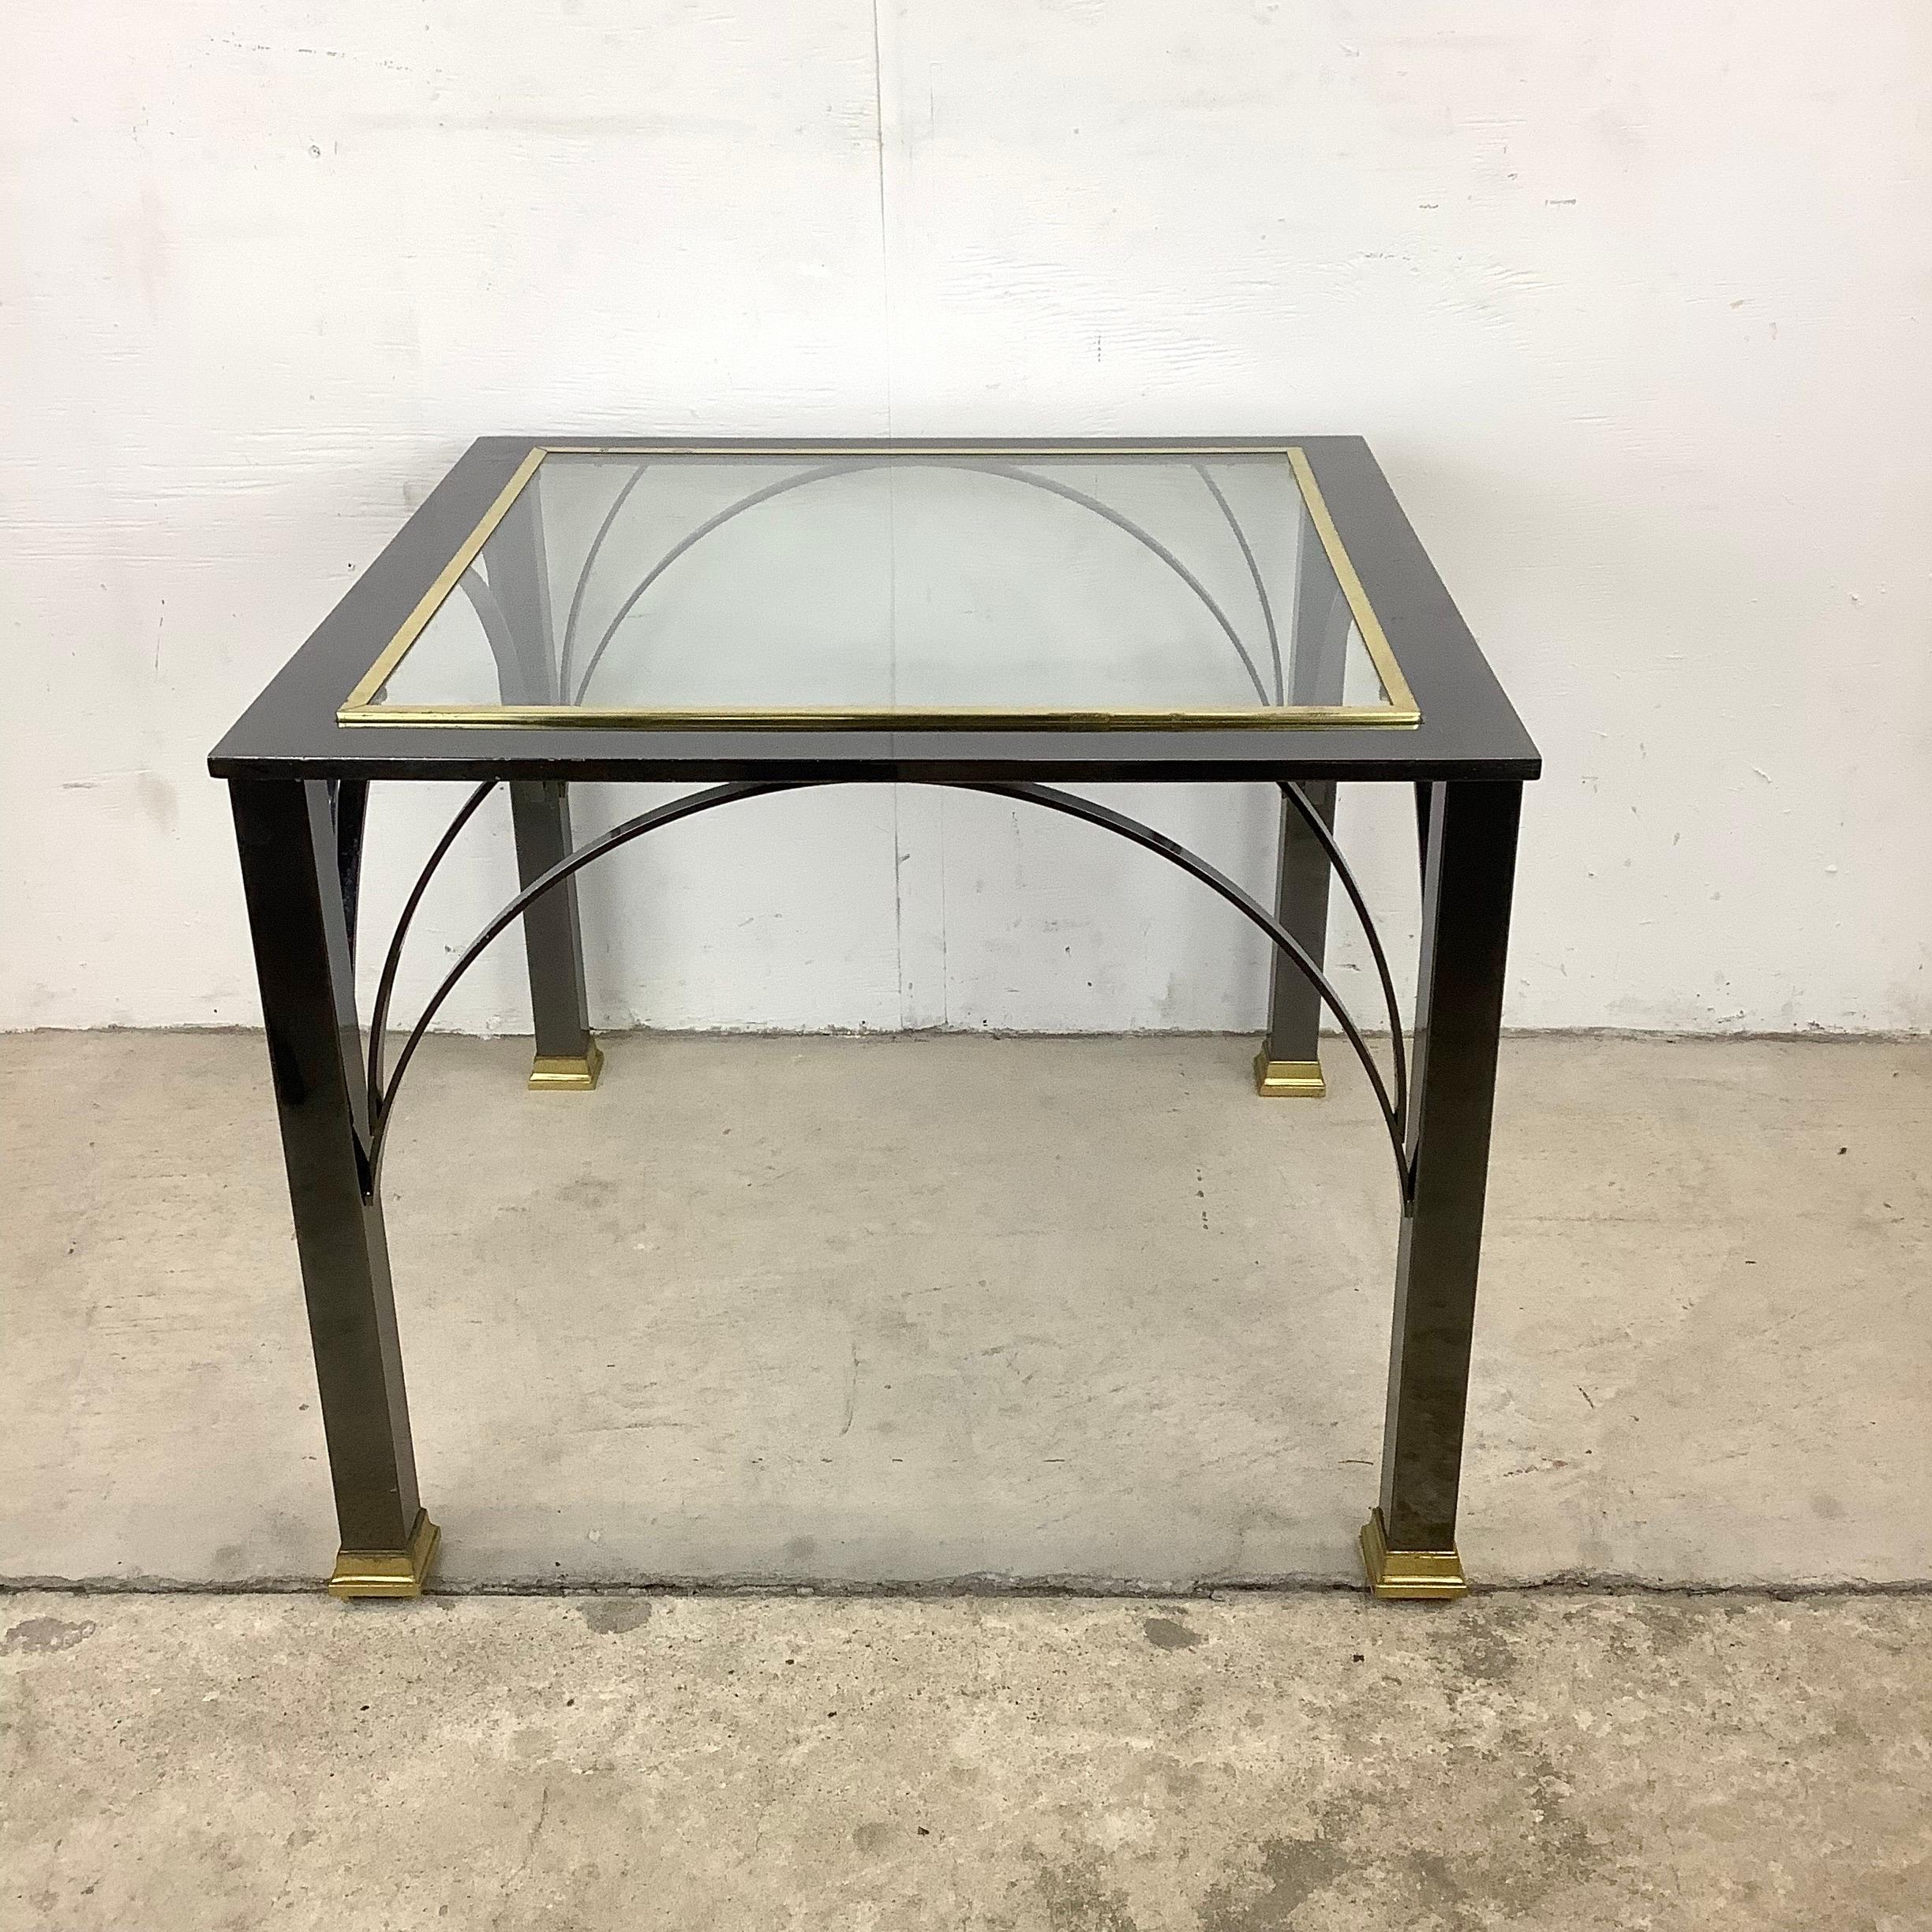 This stylish modern end table features an elegant mix of dark chrome and brass details, a sturdy table that makes an impressive addition in any seating area. Perfect height for use as a lamp table or sofa end table, with striking Milo Baughman style